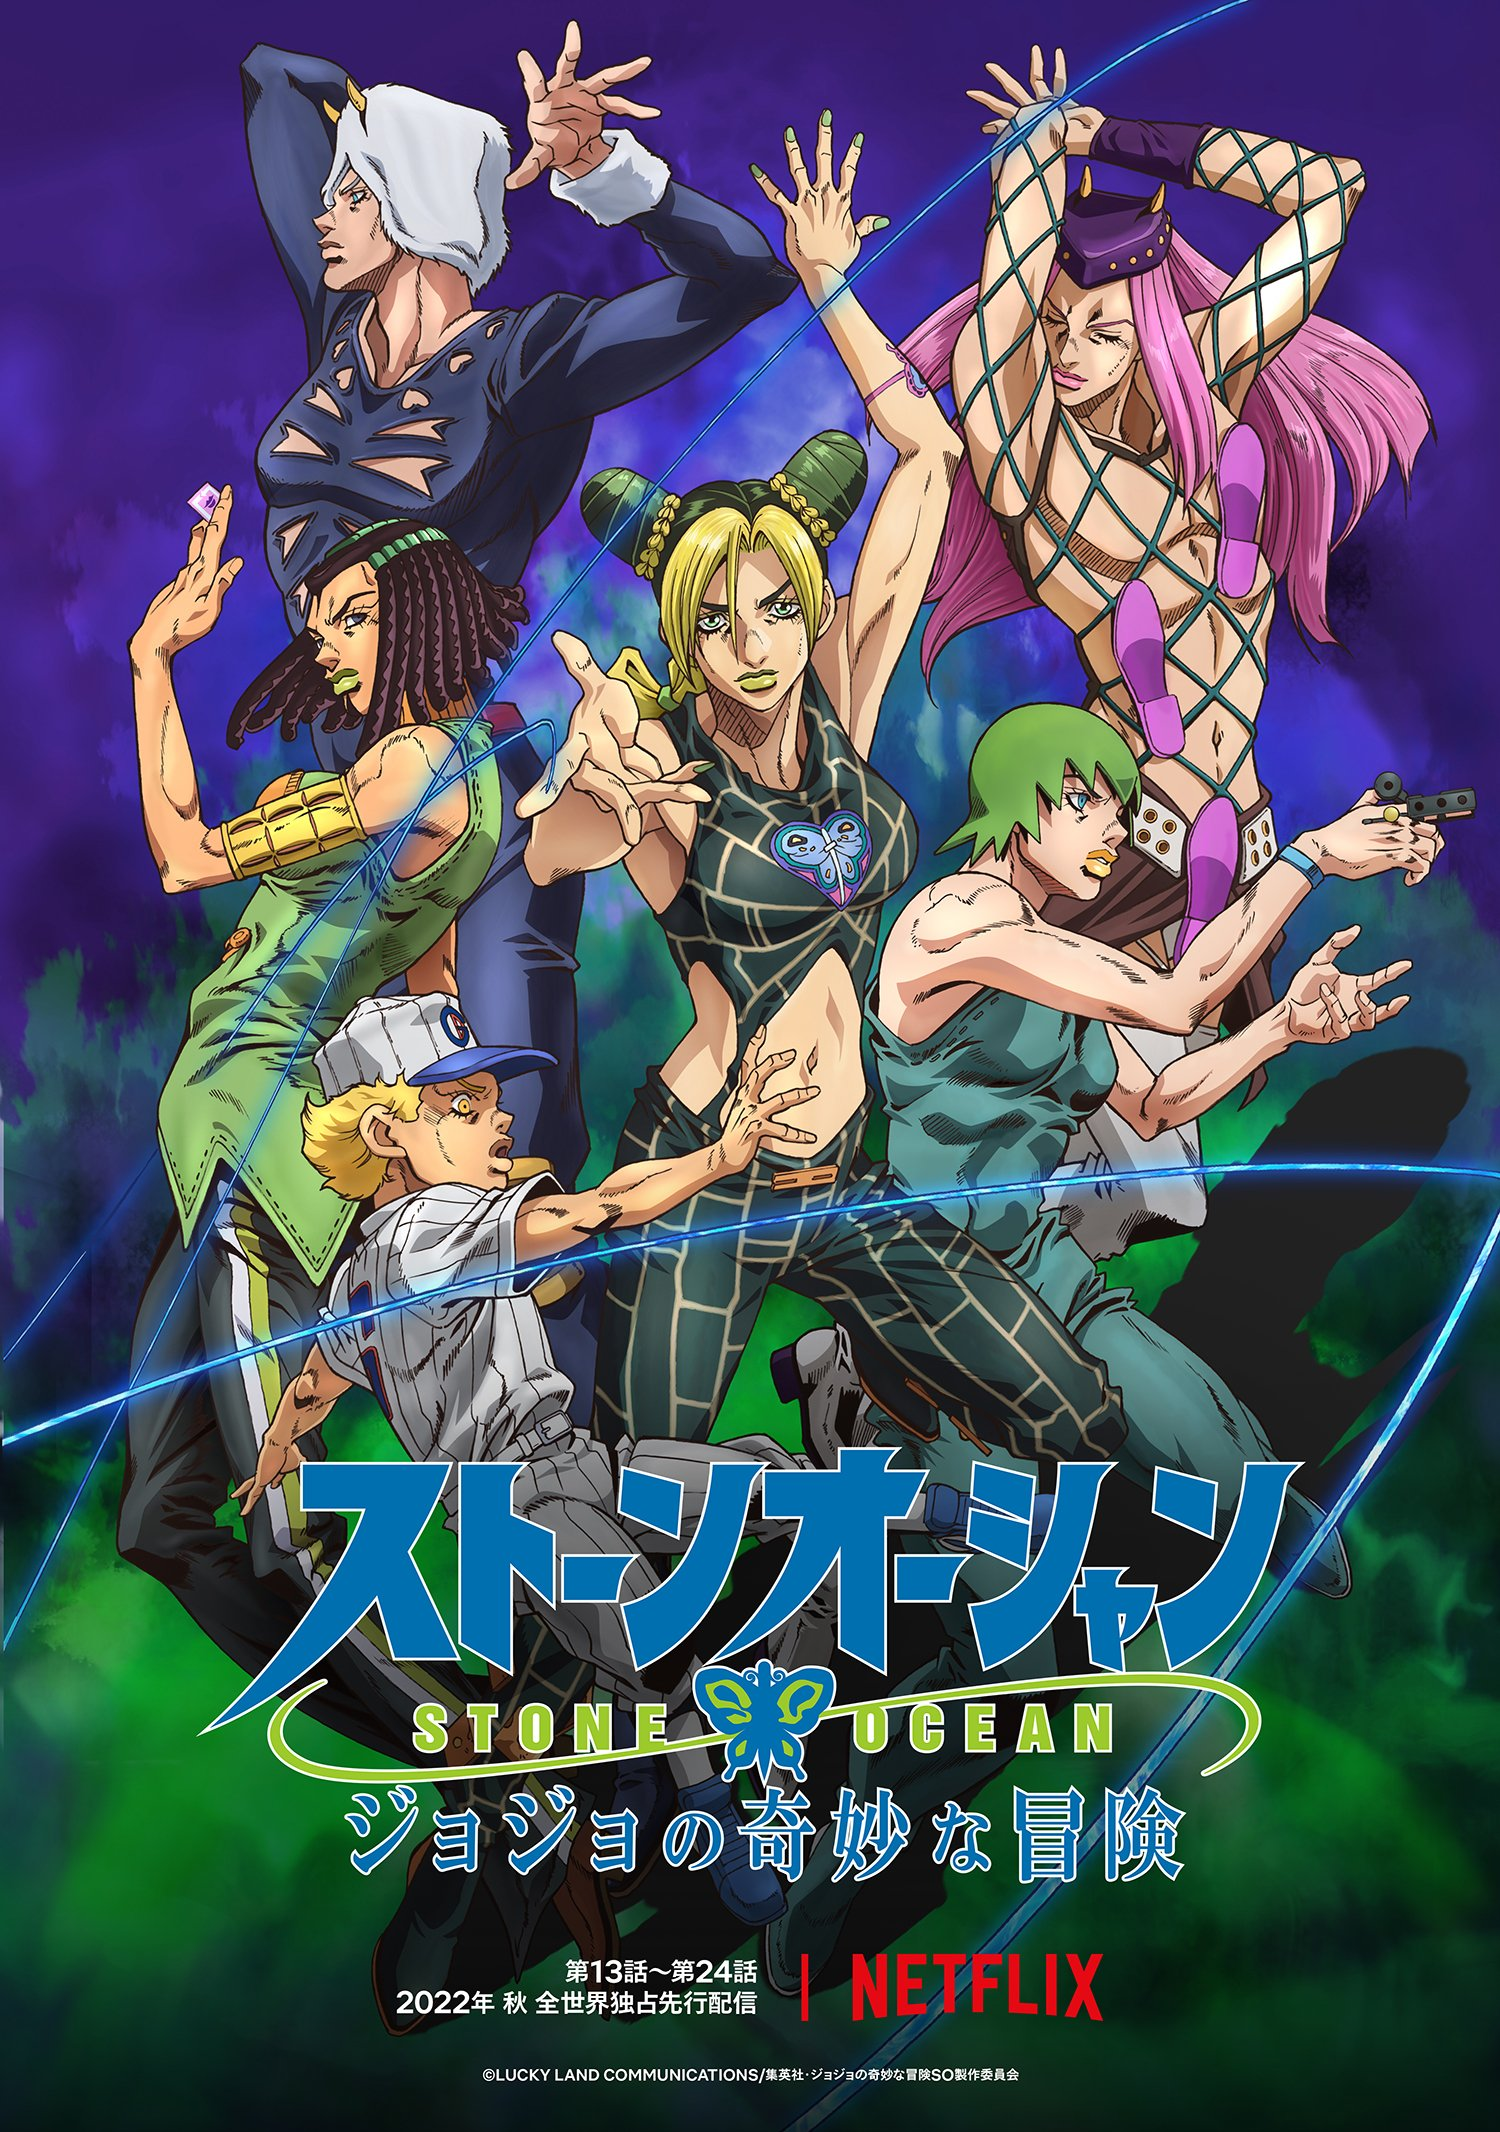 Three Stone Ocean Anime BluRay Box Sets Will Be Released